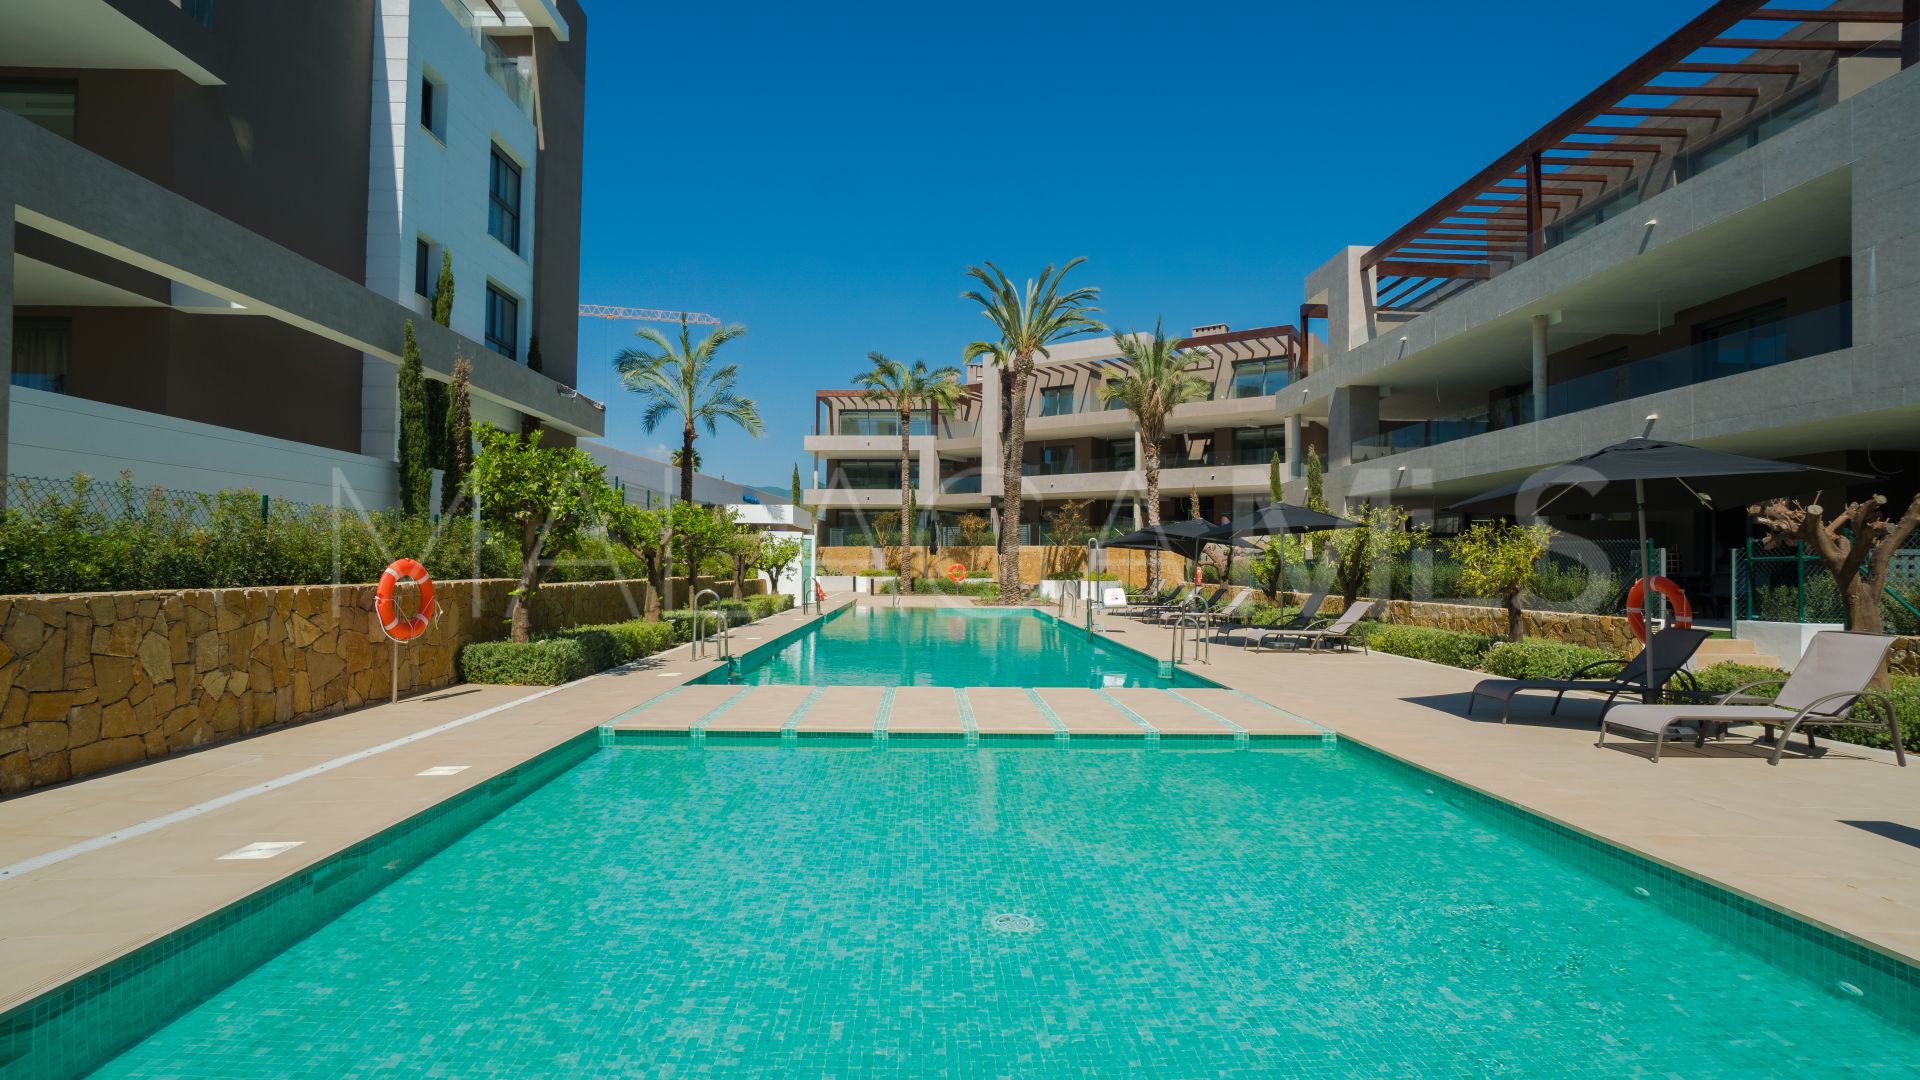 2 bedrooms apartment for sale in Estepona